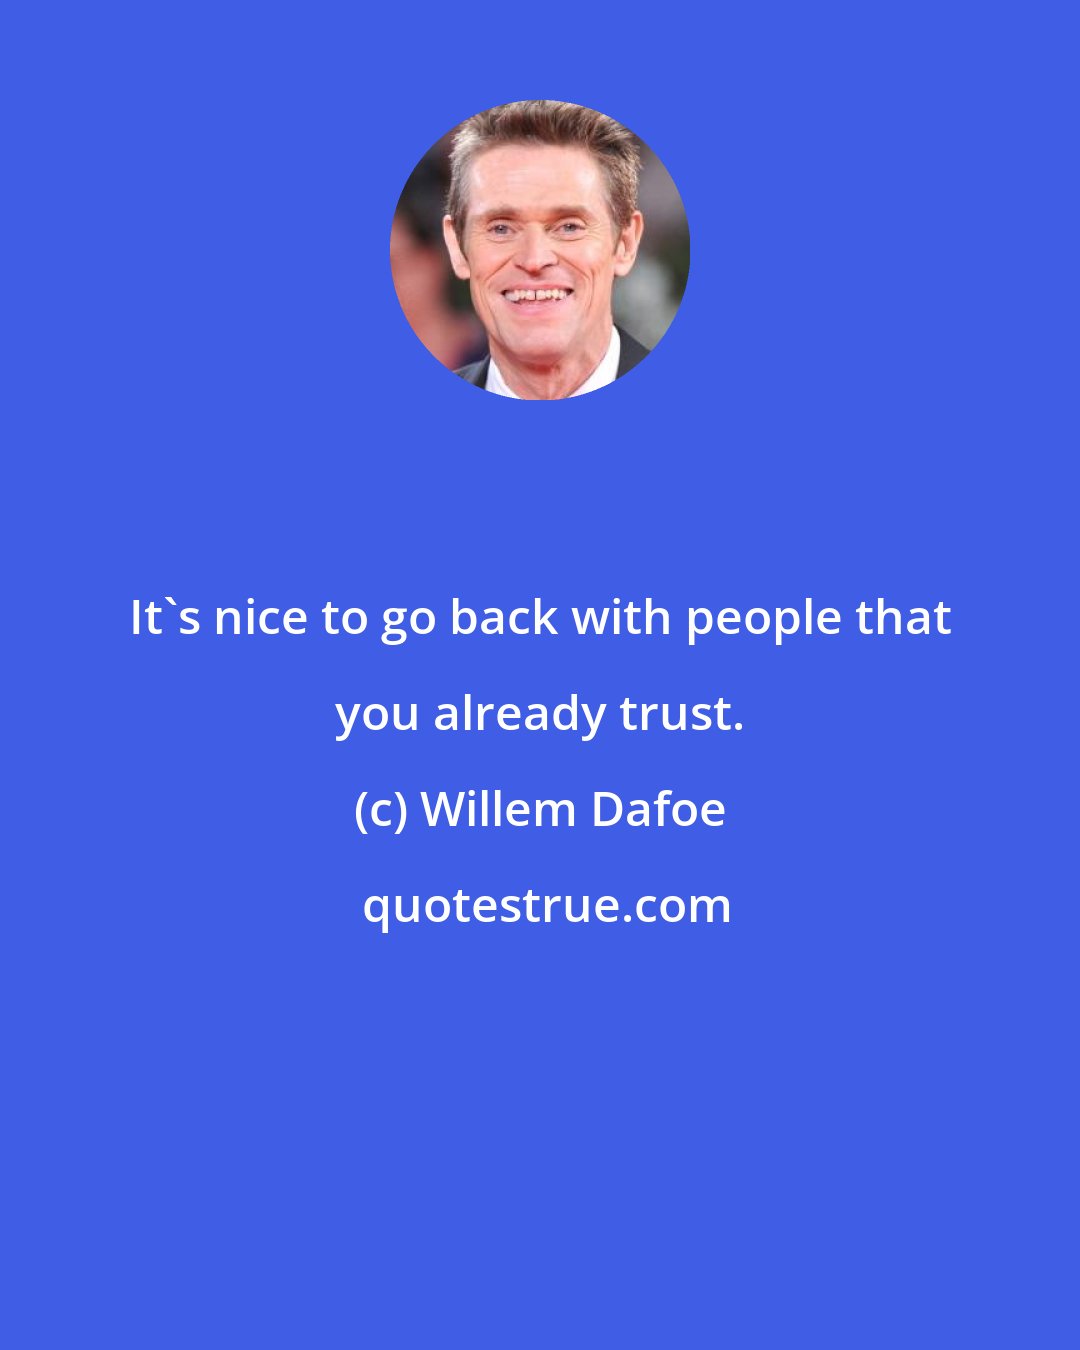 Willem Dafoe: It's nice to go back with people that you already trust.